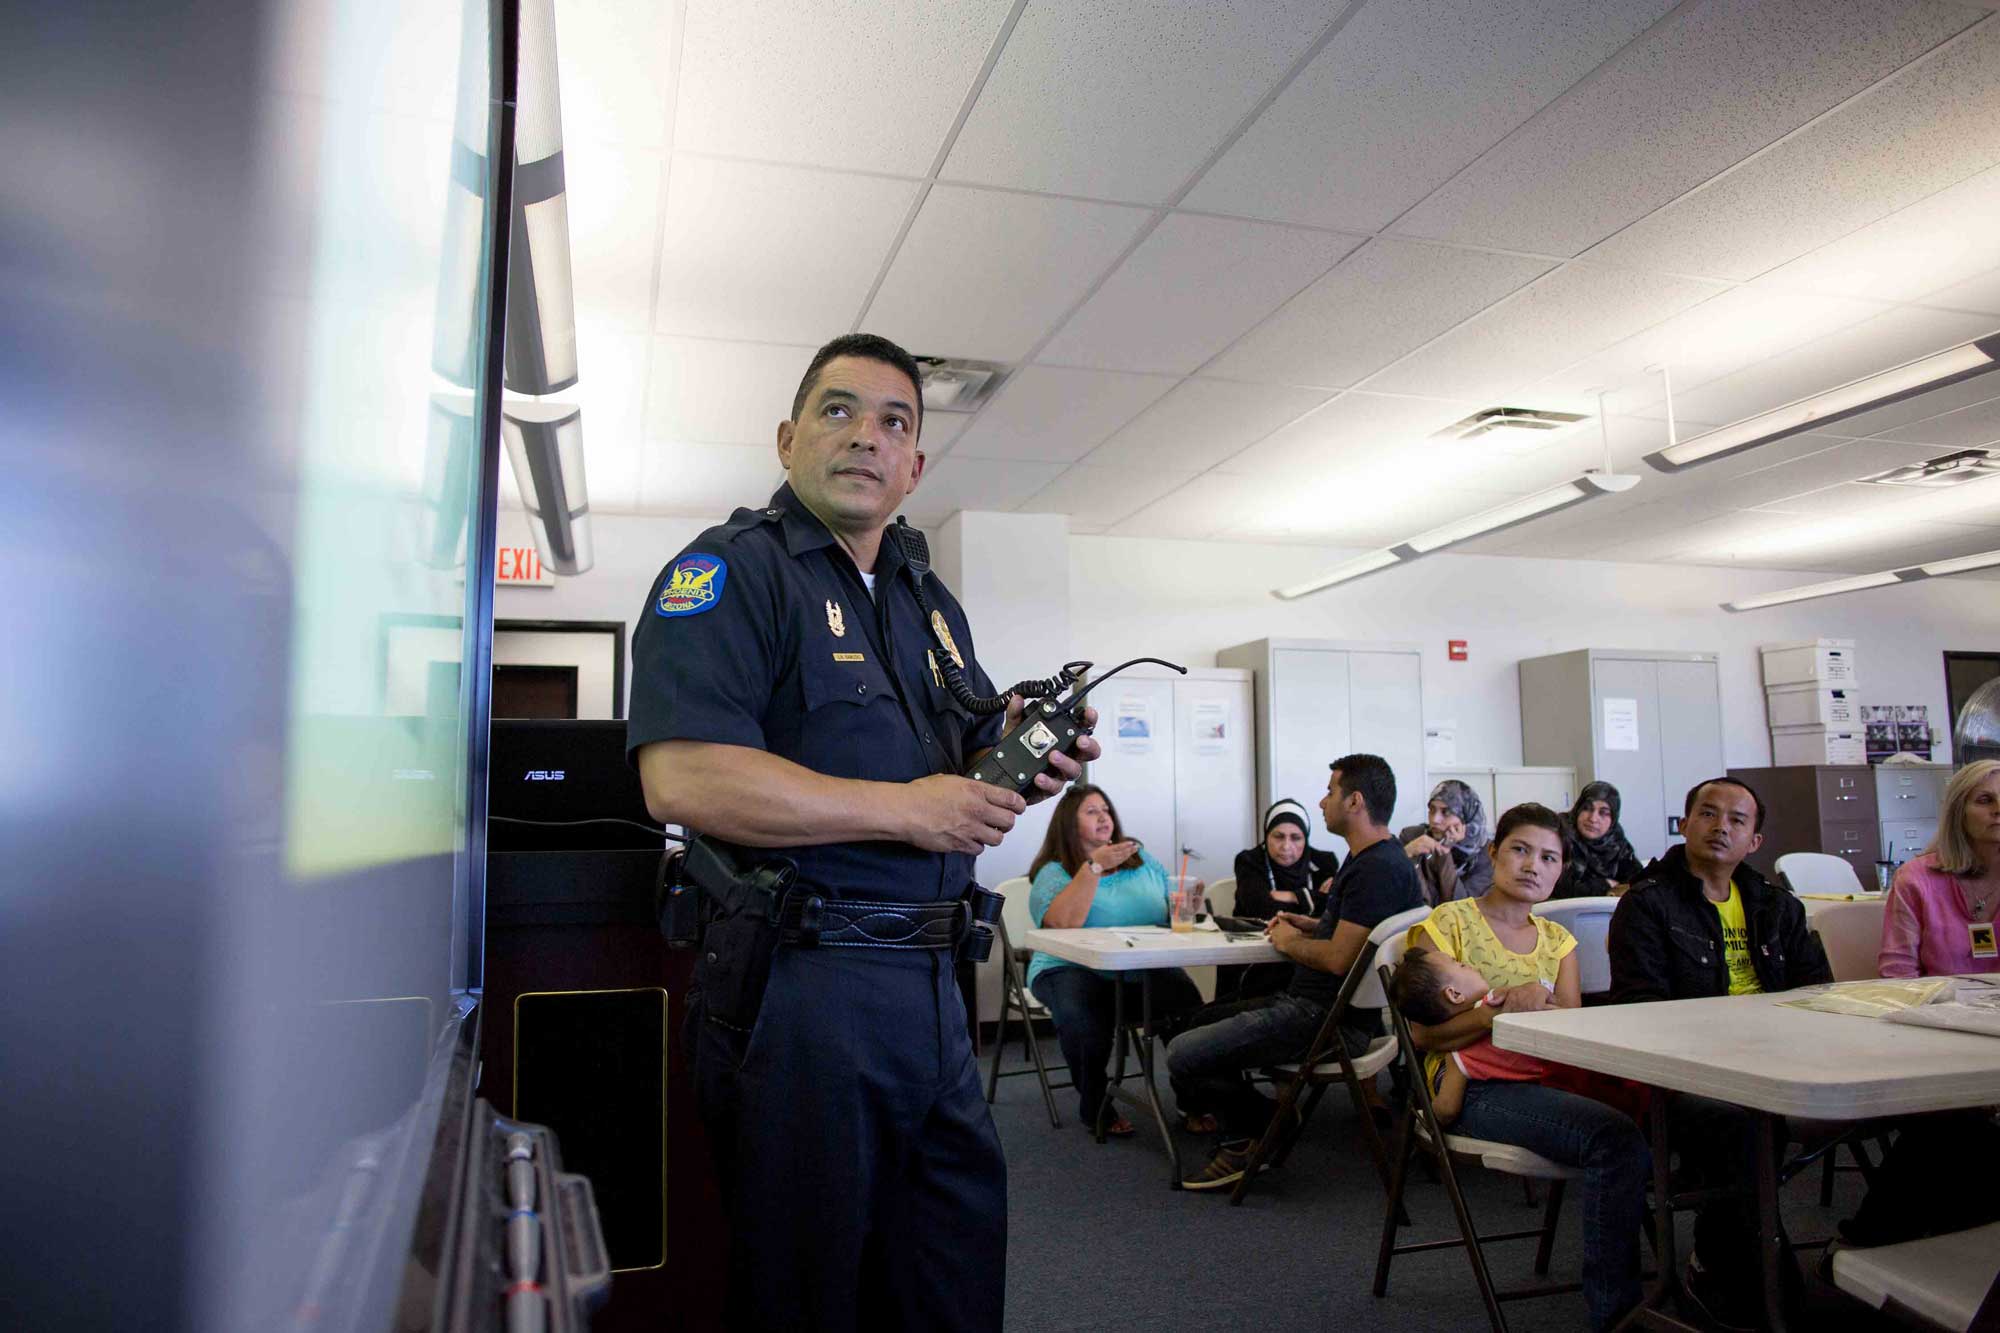 A police officer speaking to refugees about community services during a cultural orientation class